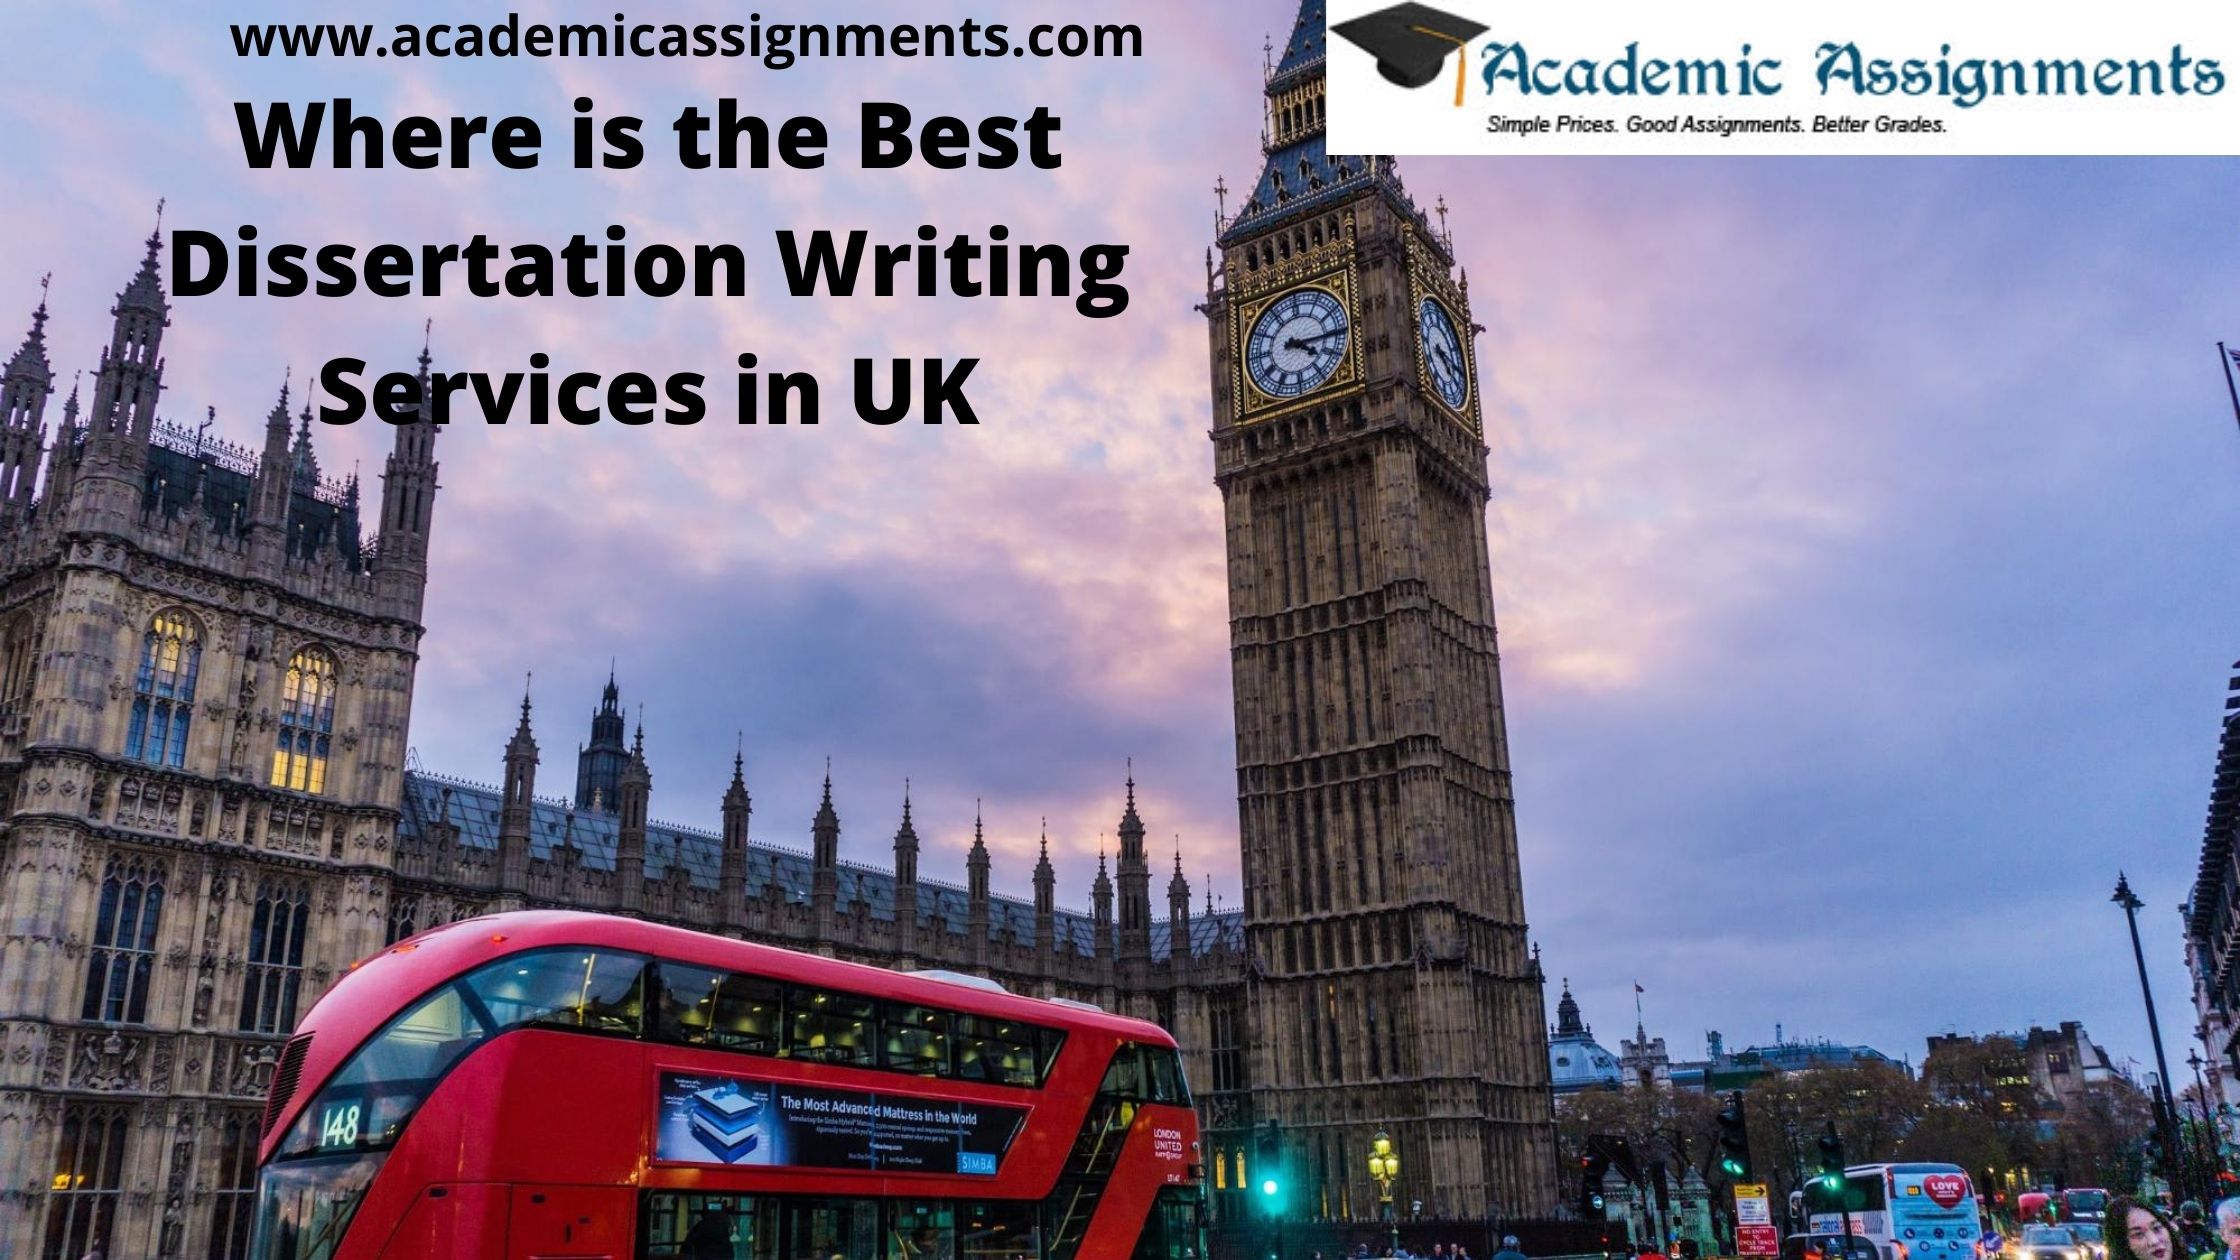 Where is the Best Dissertation Writing Services in UK